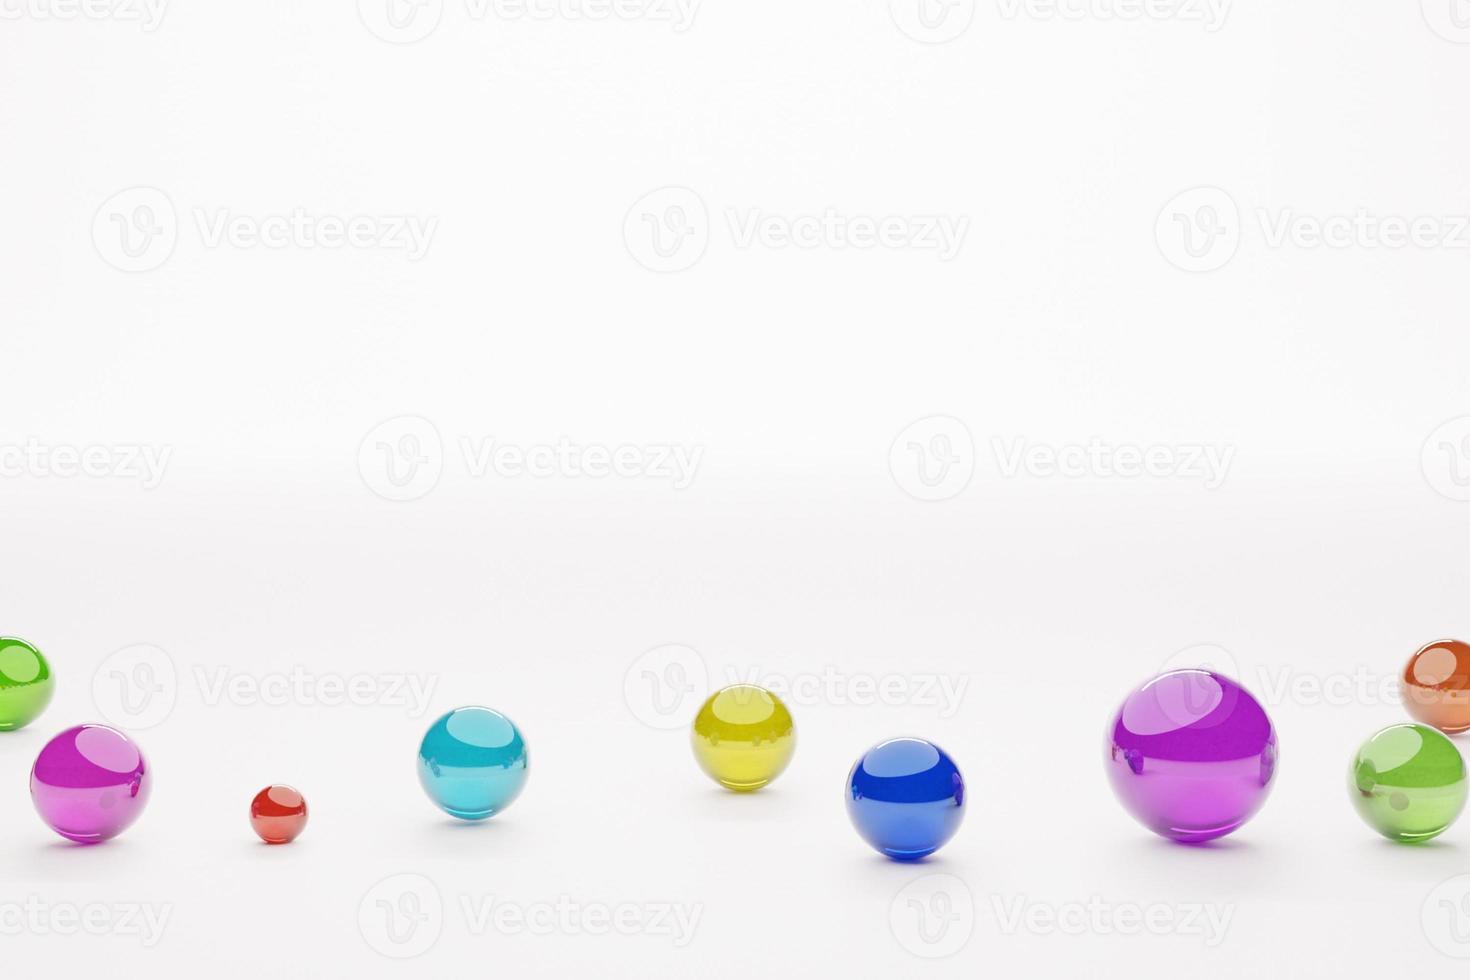 The images for pastel backgrounds have beautiful brightly colored glitter beads. photo